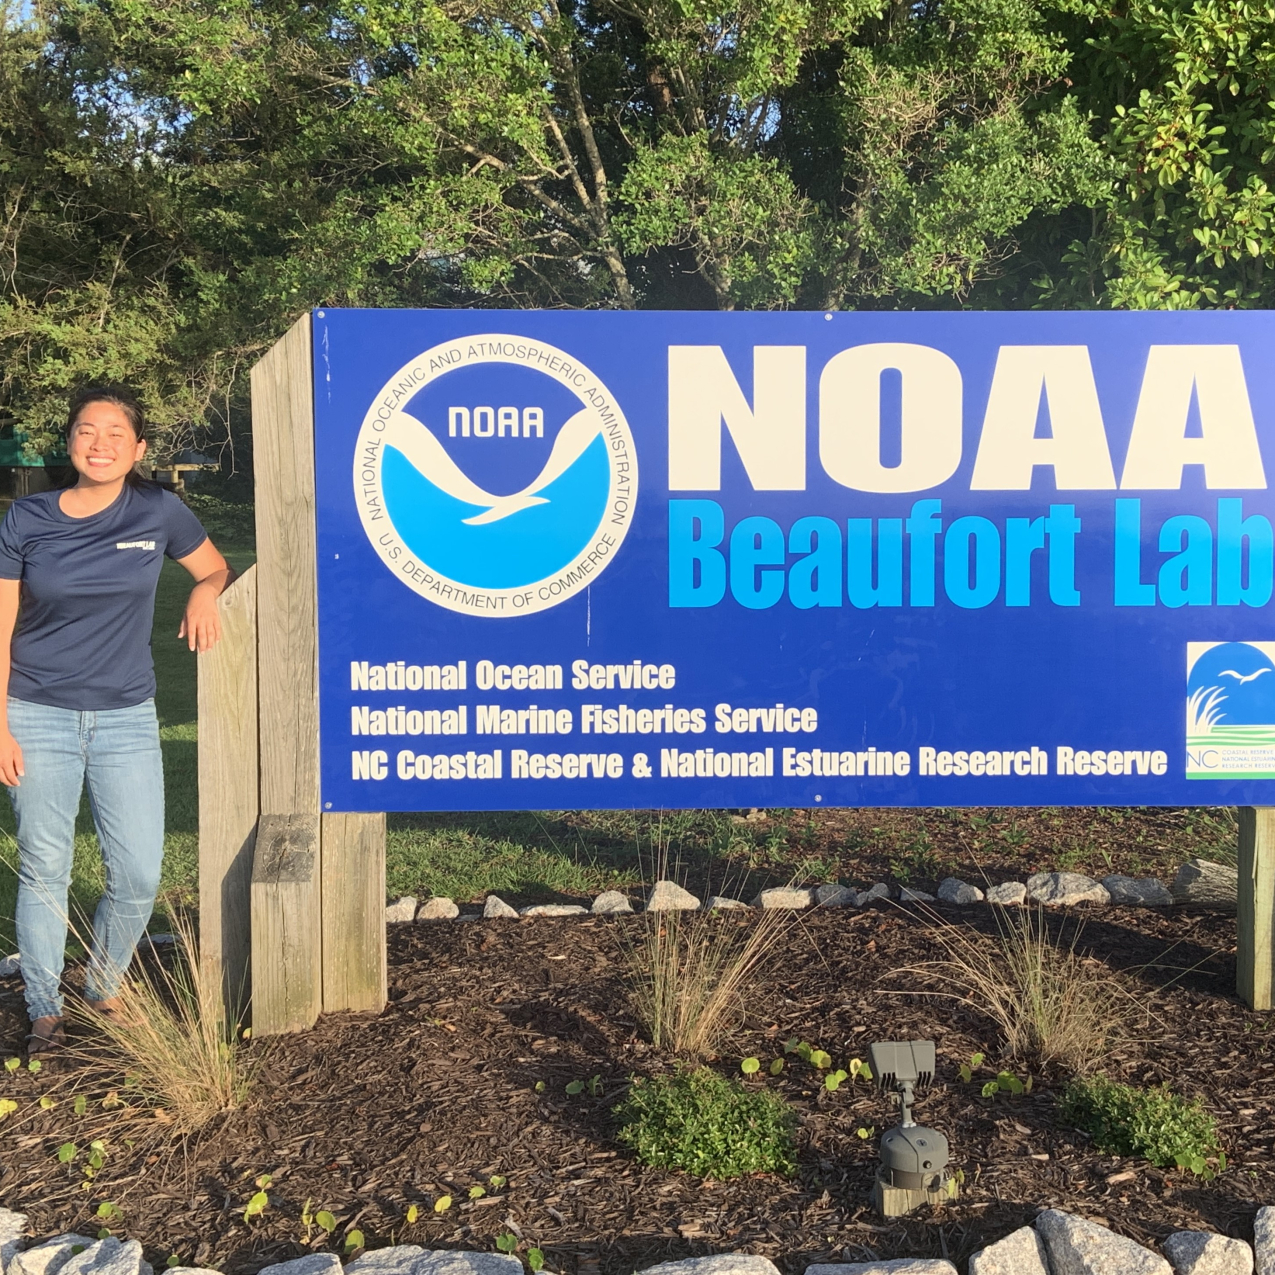 Michaela stands next to a large sign that says "NOAA Beaufort Lab" beside a NOAA logo. Smaller text reads "National Ocean Service, National Marine Fisheries Service, NC Coastal Reserve and National Estuarine Research Reserve